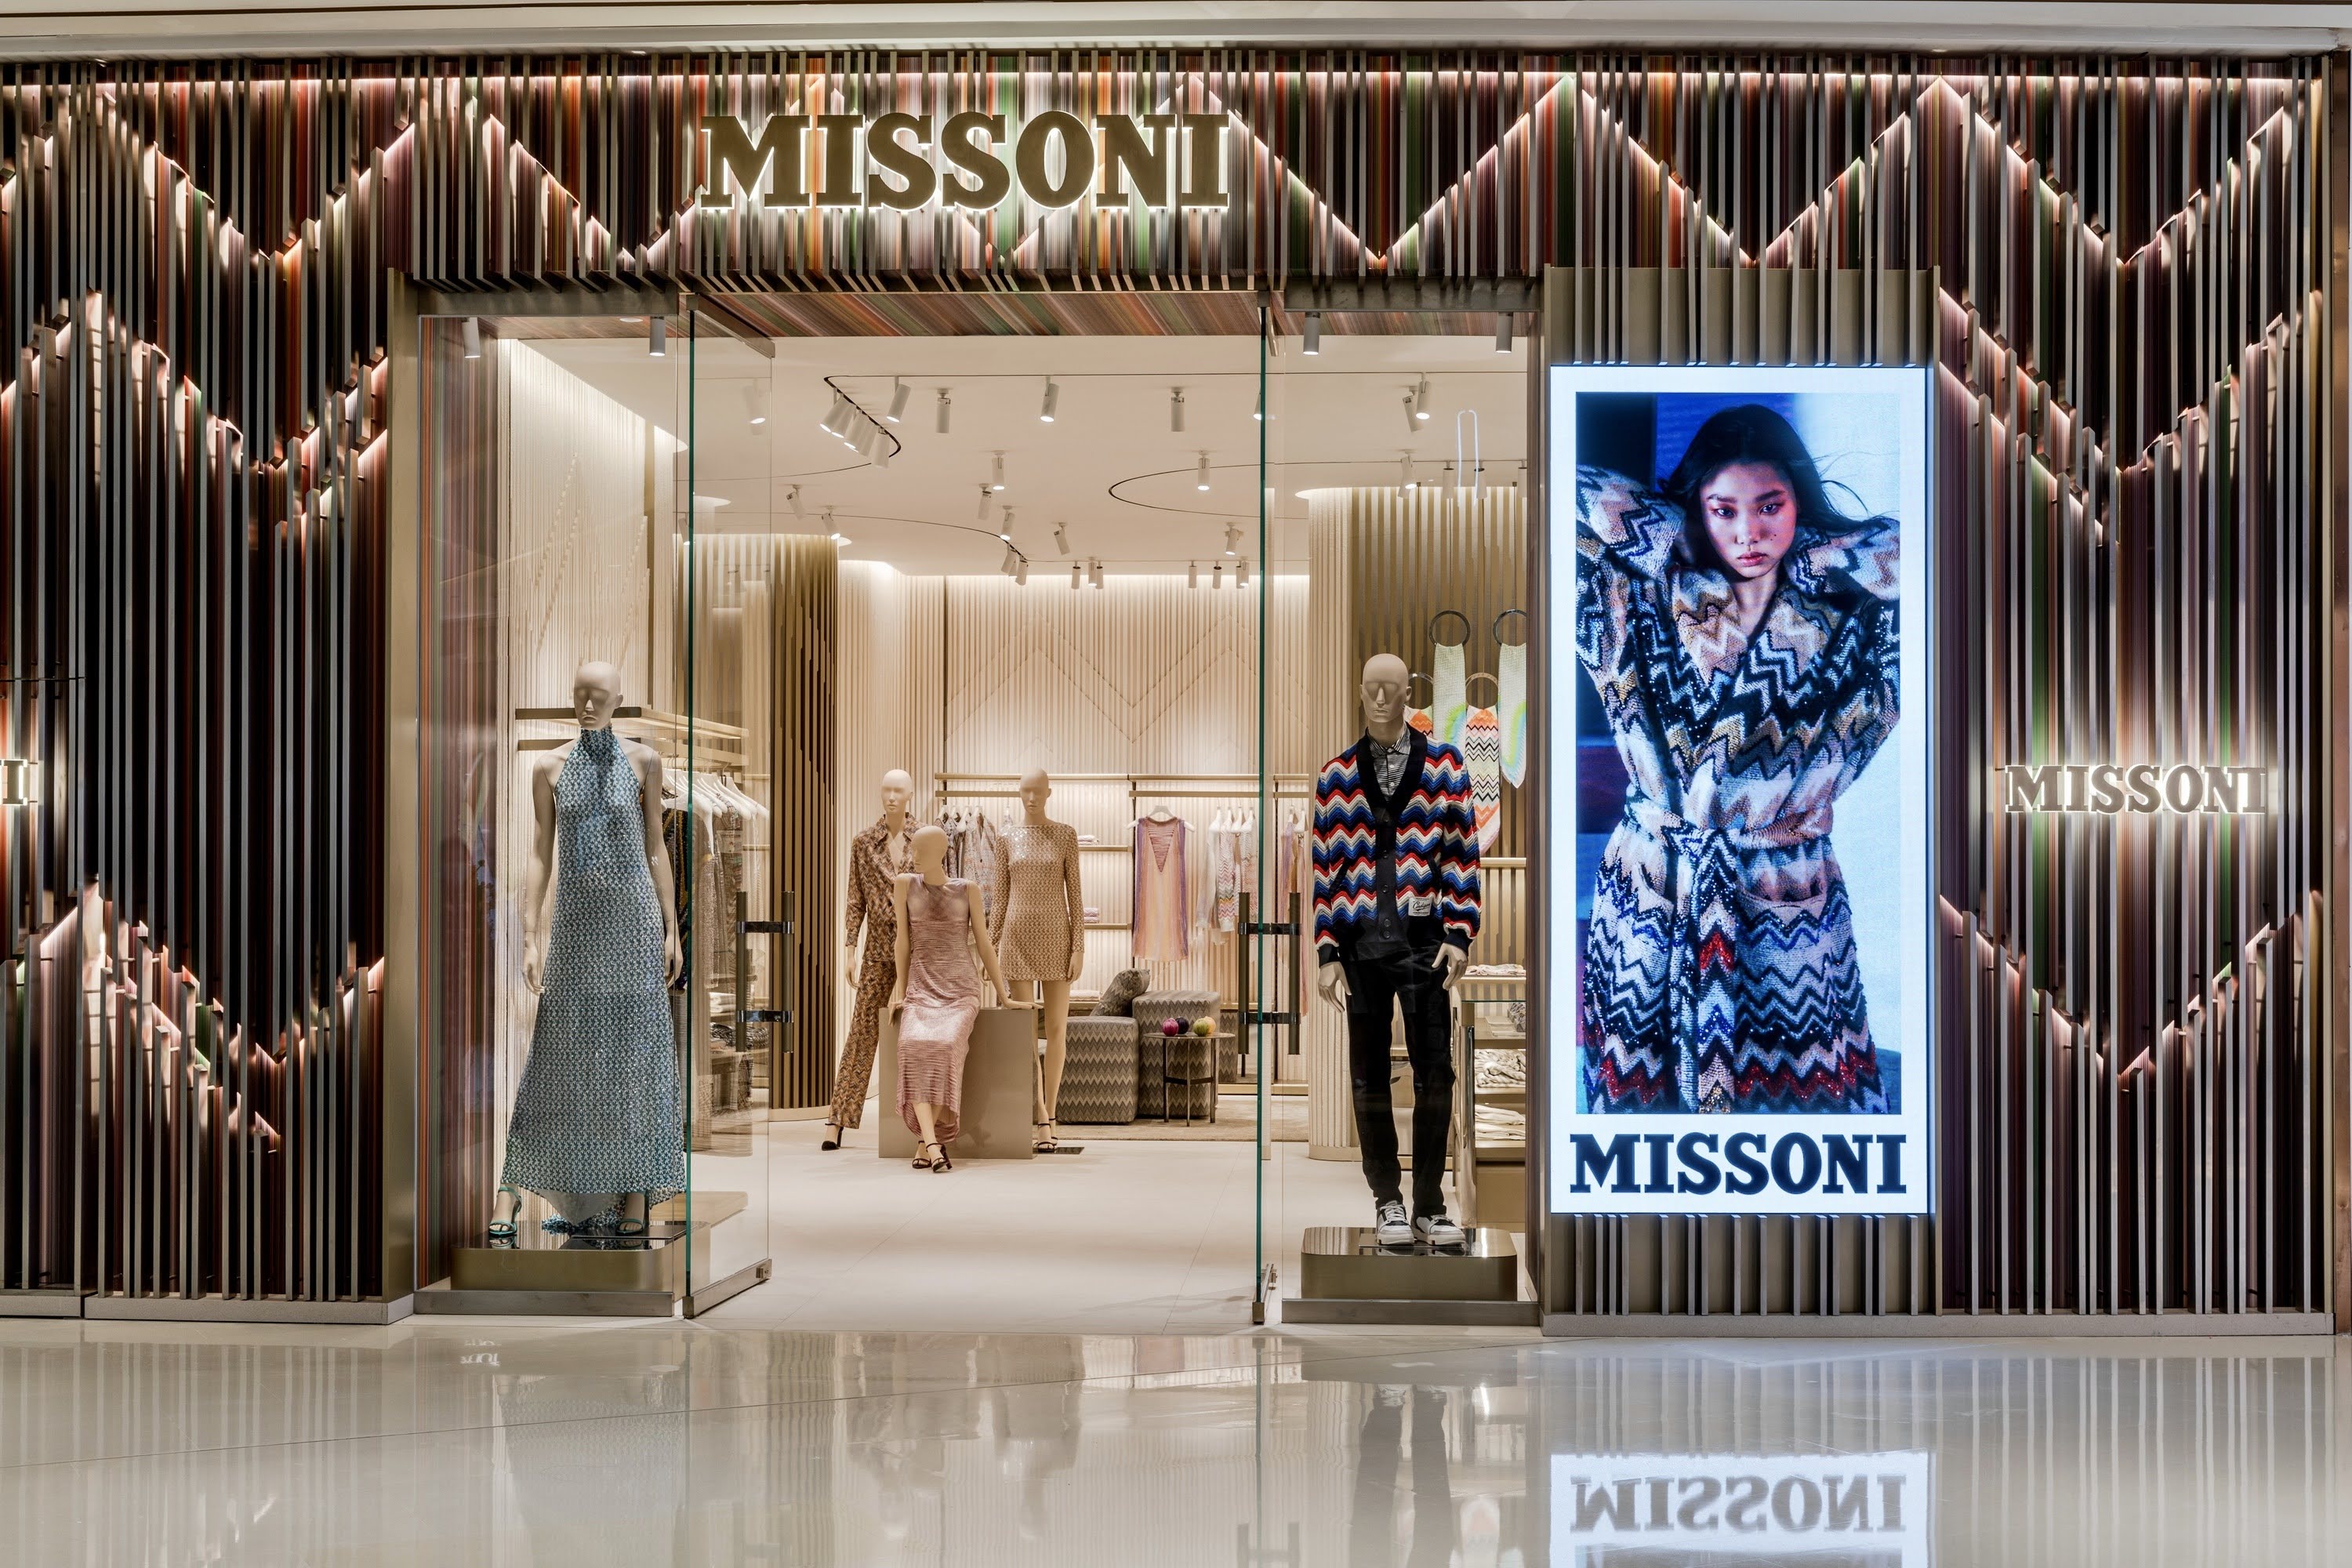 Milleforma once again a protagonist for Missoni!